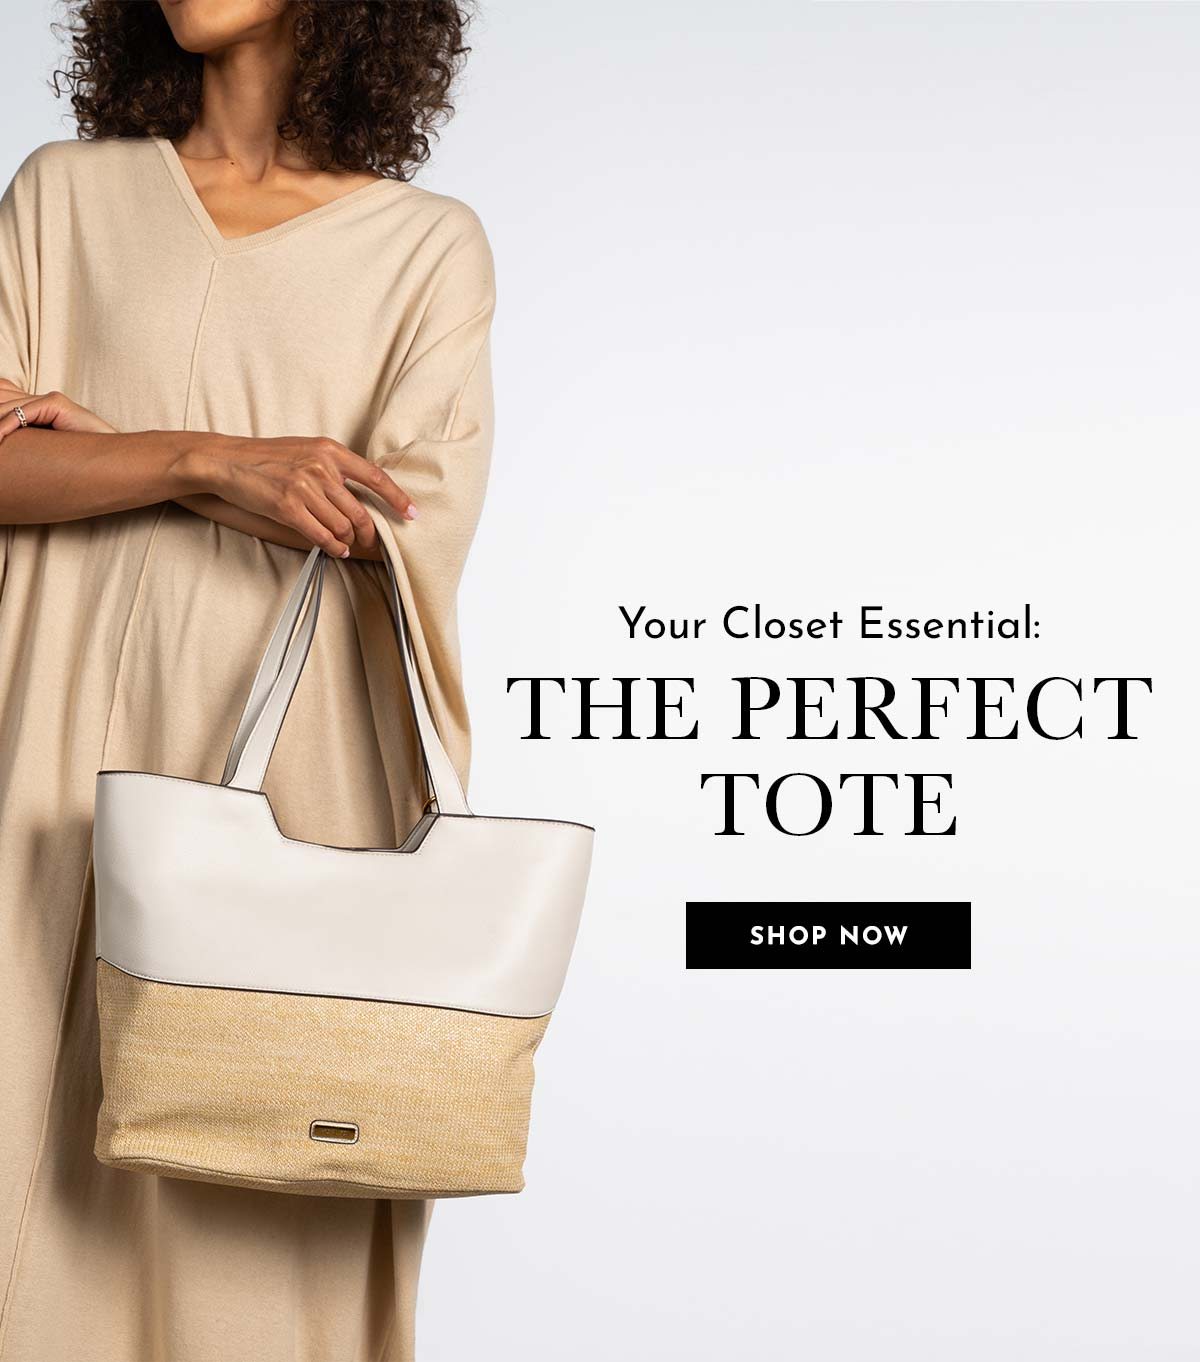 Your Closet Essential: The Perfect Tote